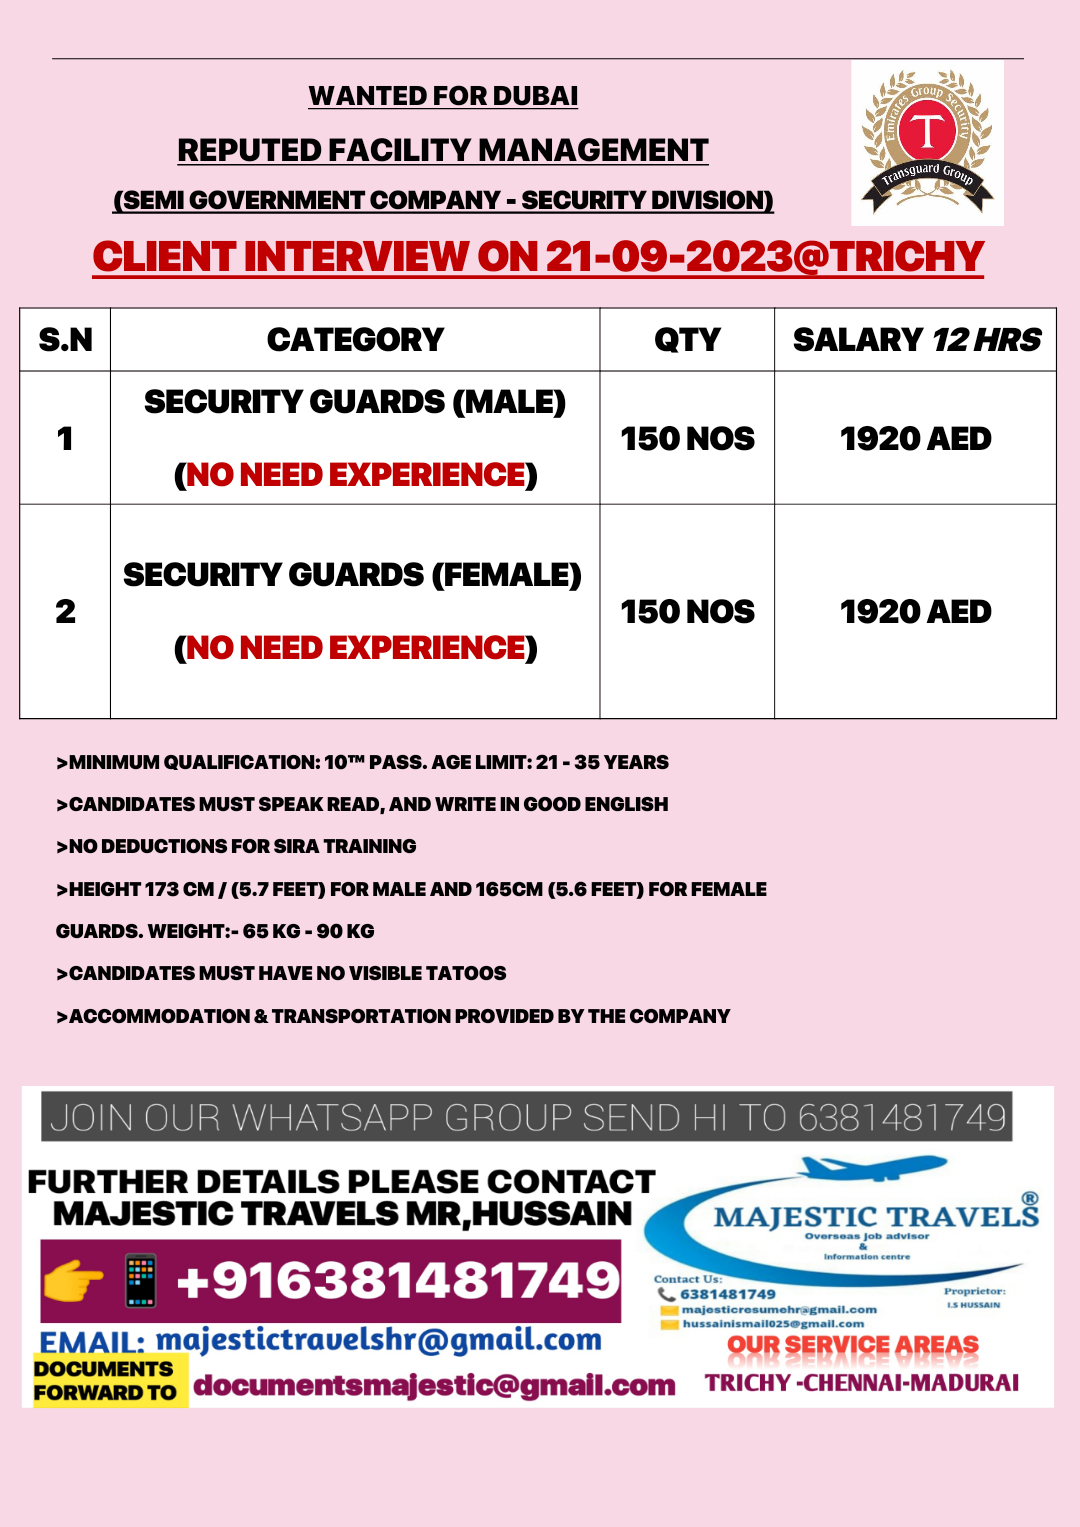 JOB vacancy Chennai job openings for DUBAI client interview on 21-09-2023@trichy further details please call 6381481749